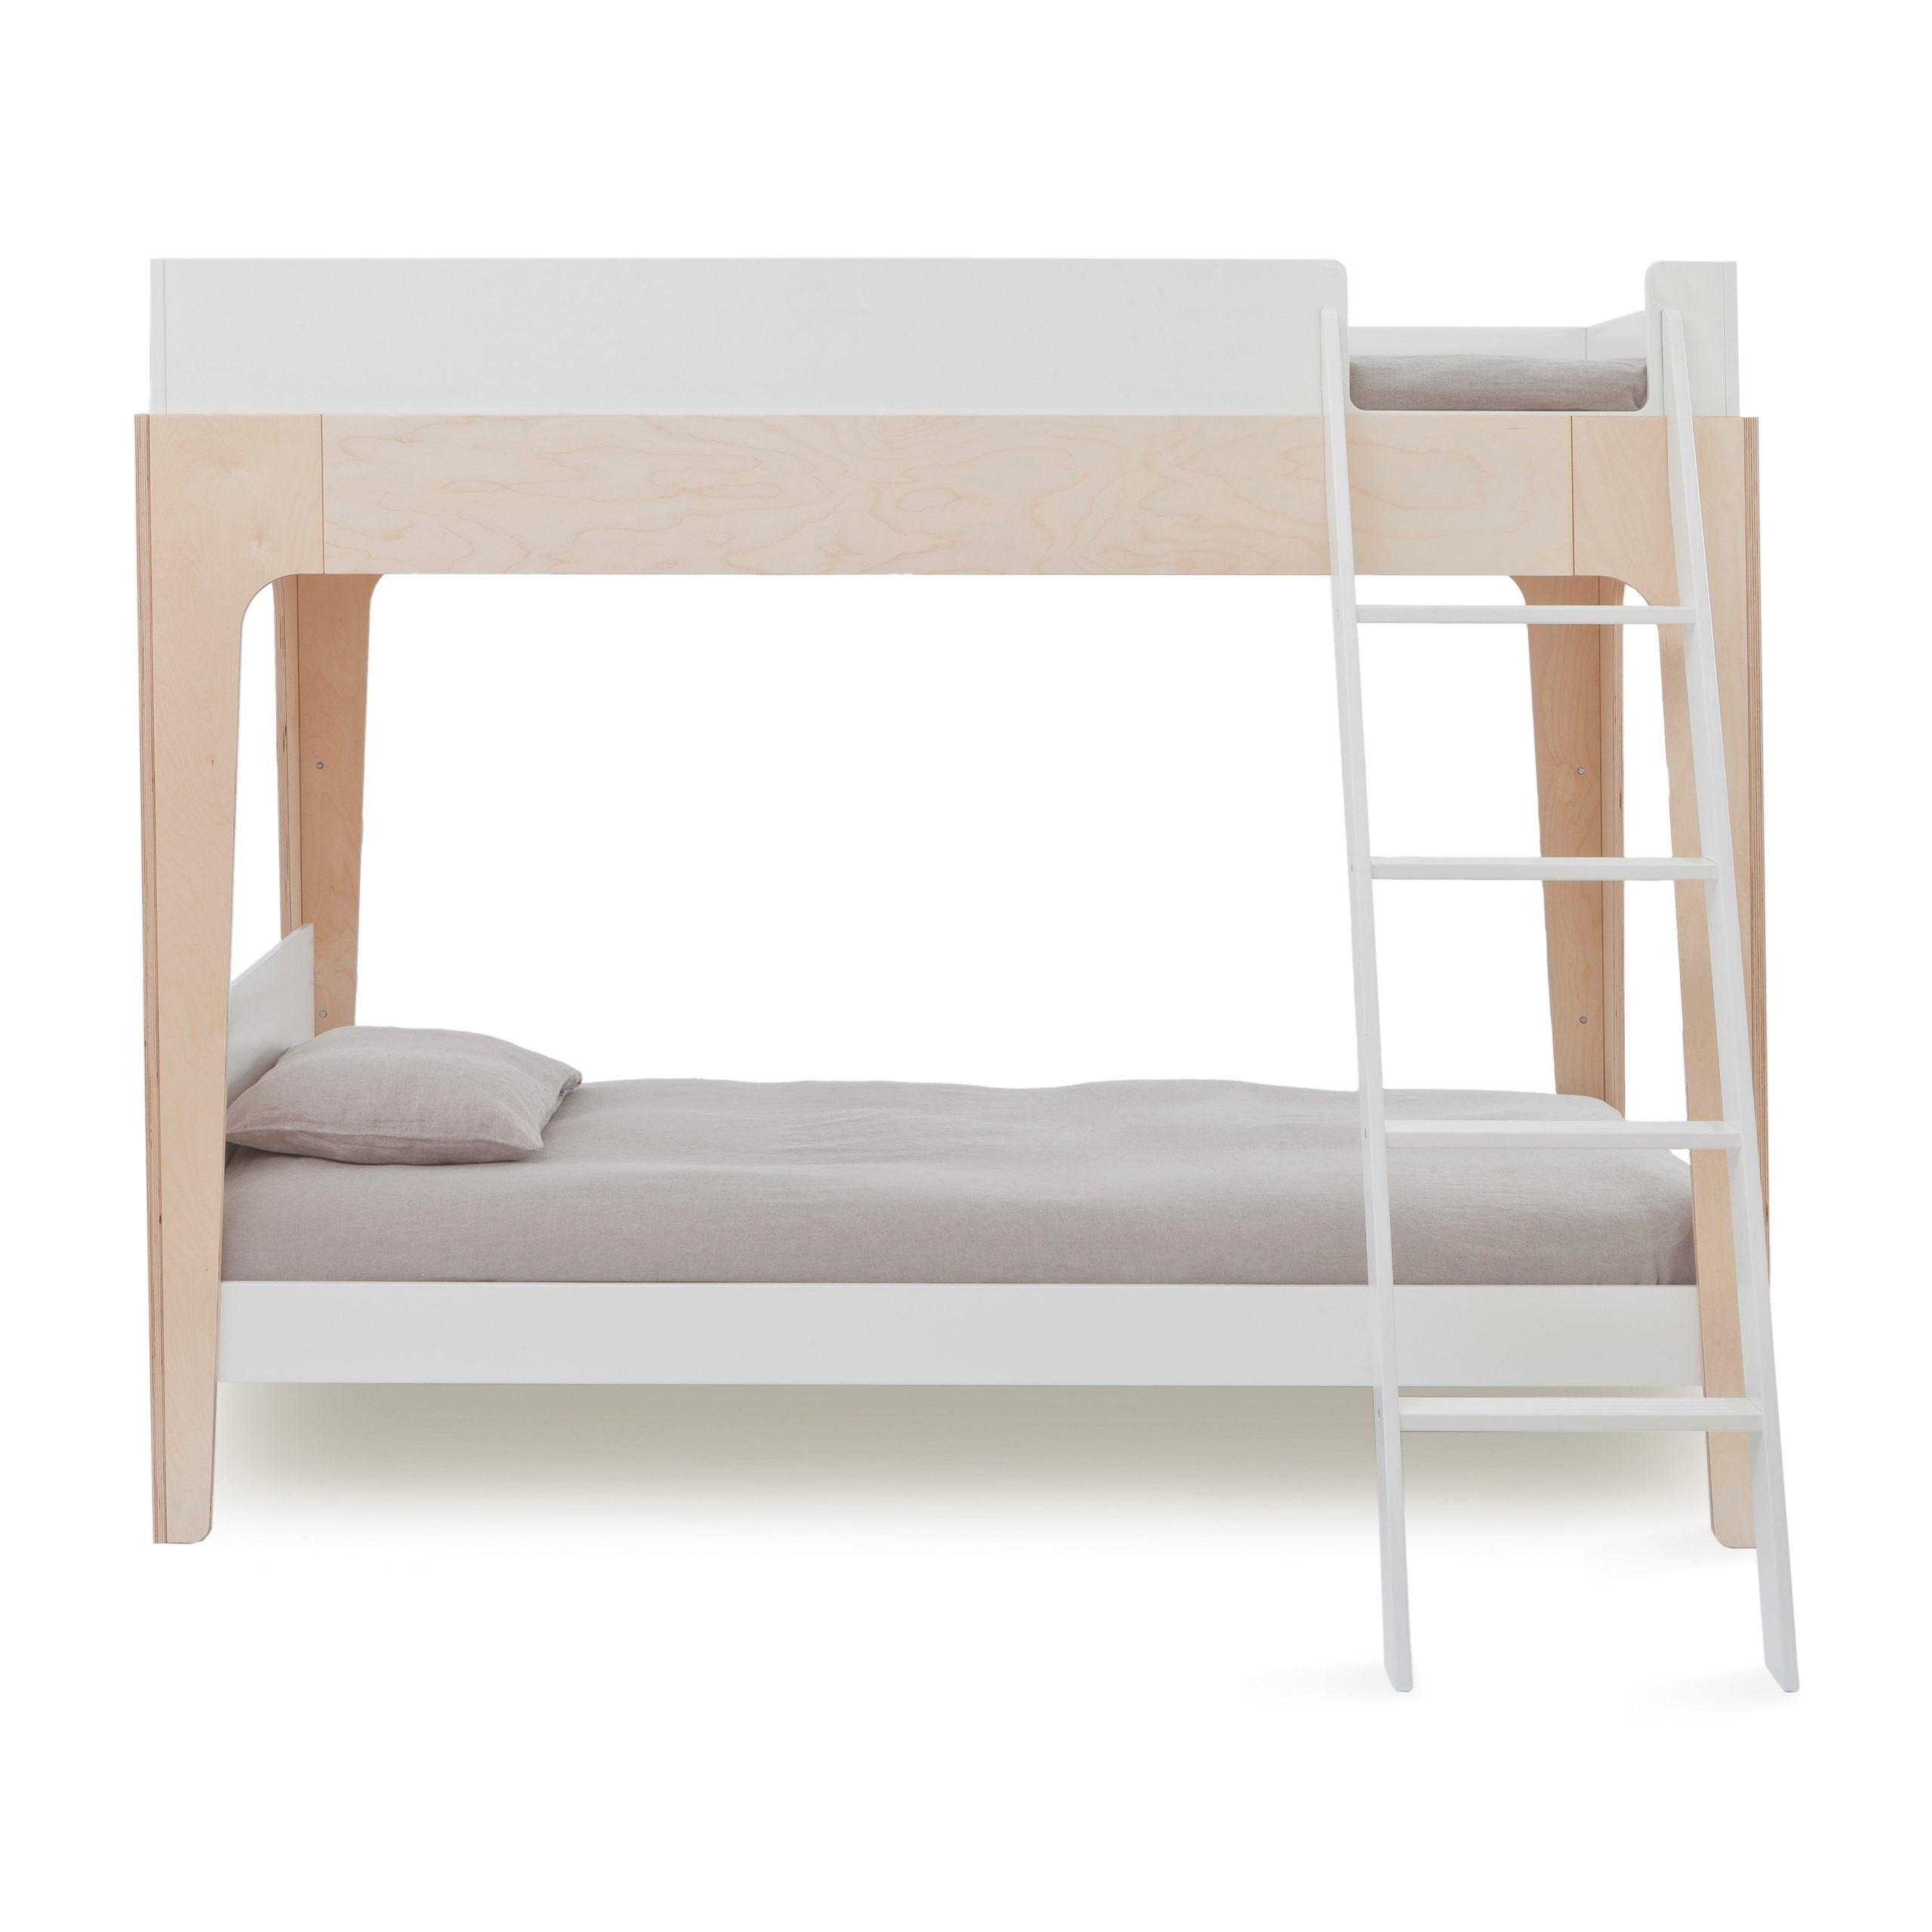 Oeuf NYC Perch Bunk Bed - Birch